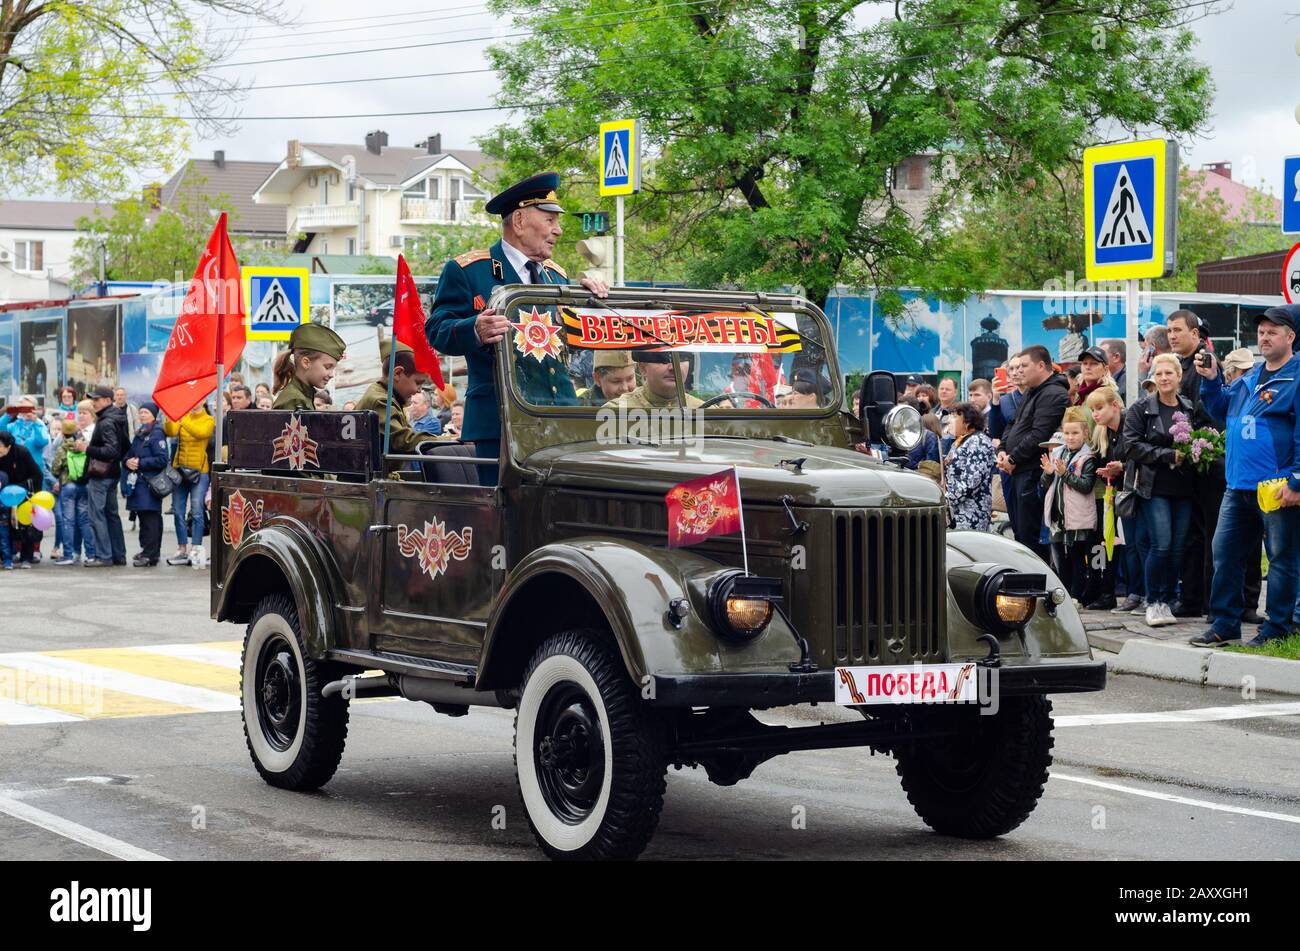 Anapa, Russia - May 9, 2019: Veterans ride the streets of the city of Anapa in an old restored military vehicle Stock Photo